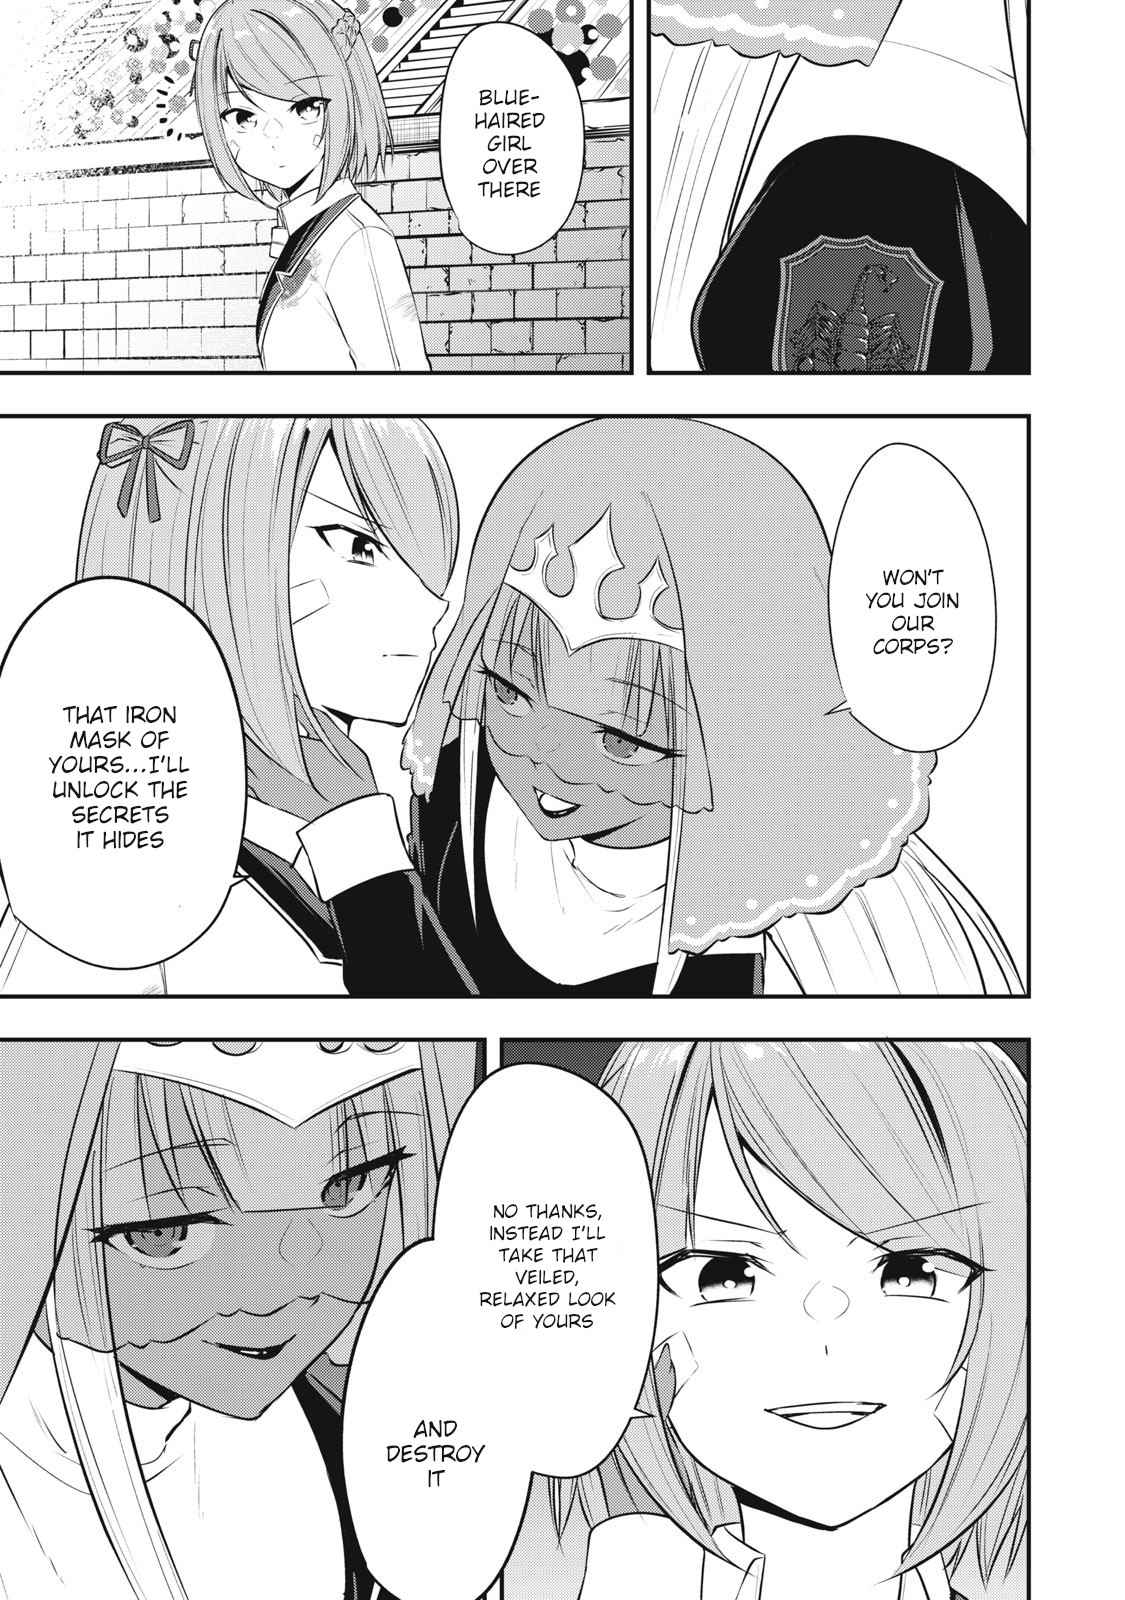 The Last Sage of the Imperial Sword Academy Chapter 18-eng-li - Page 8